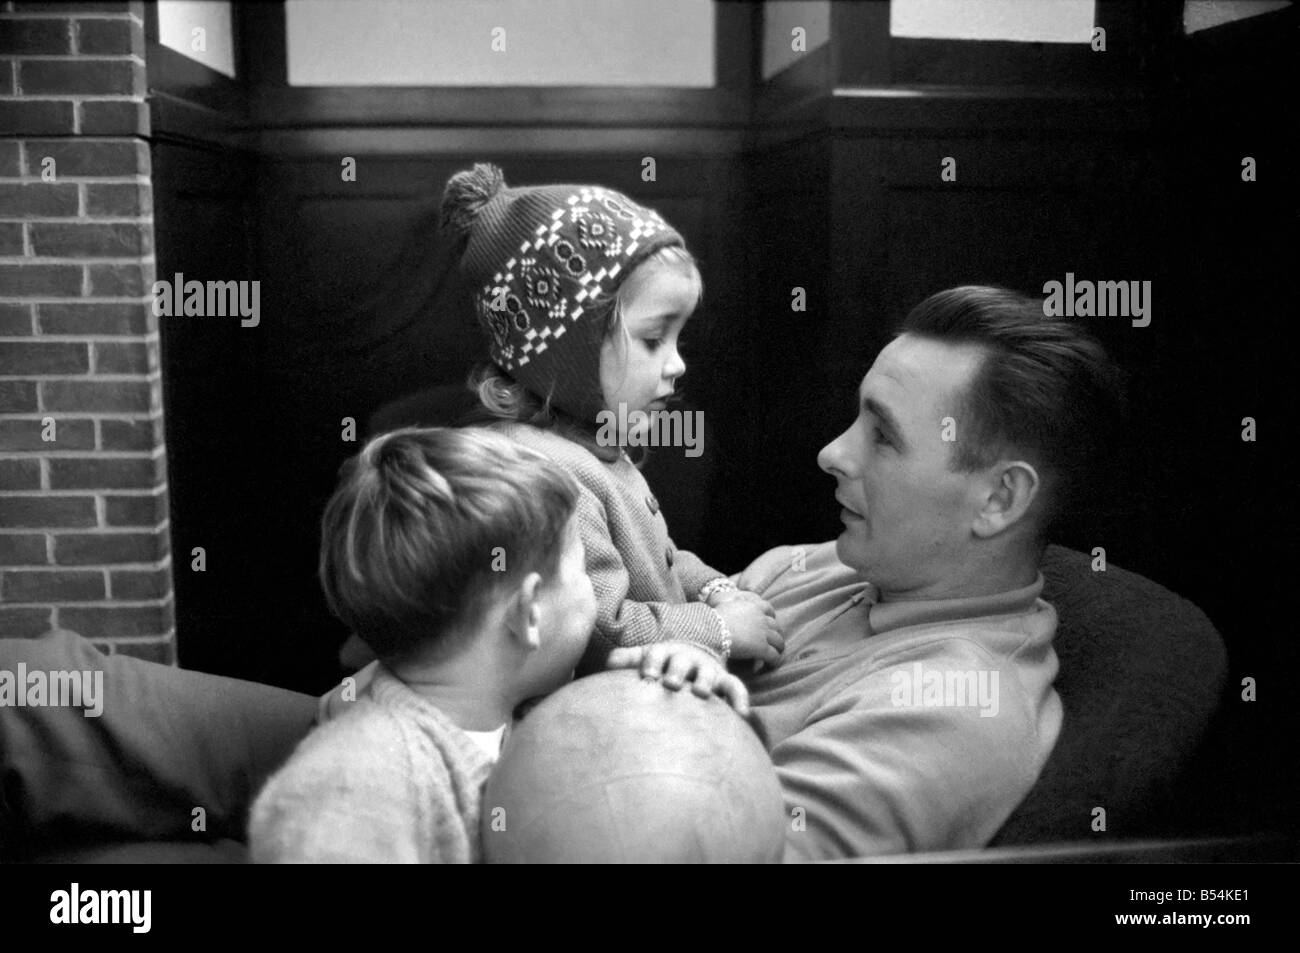 Sport: Football: Derby manager Brian Clough ponders the league cup draw the morning after his team's success at the baseball ground against Crystal Palace. Brian Clough with his two year old daughter Elizabeth watched by his son. October 1969 Z10423-001 Stock Photo